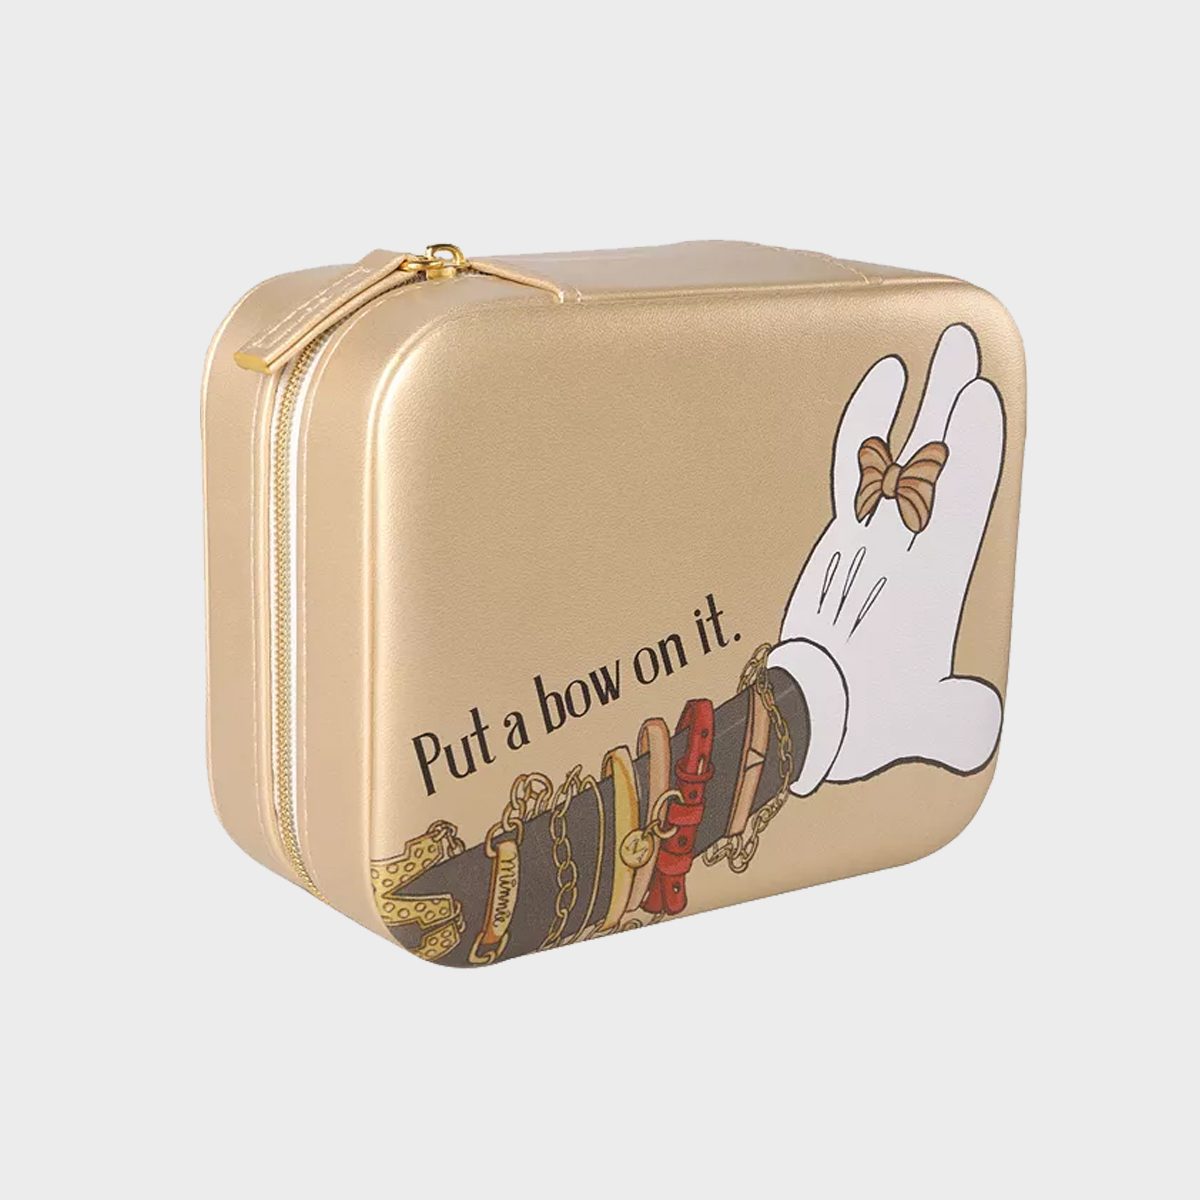 https://www.rd.com/wp-content/uploads/2023/02/Minnie-Mouse-Gold-Square-Jewelry-Case-ecomm-macys.com_.jpg?fit=700%2C700